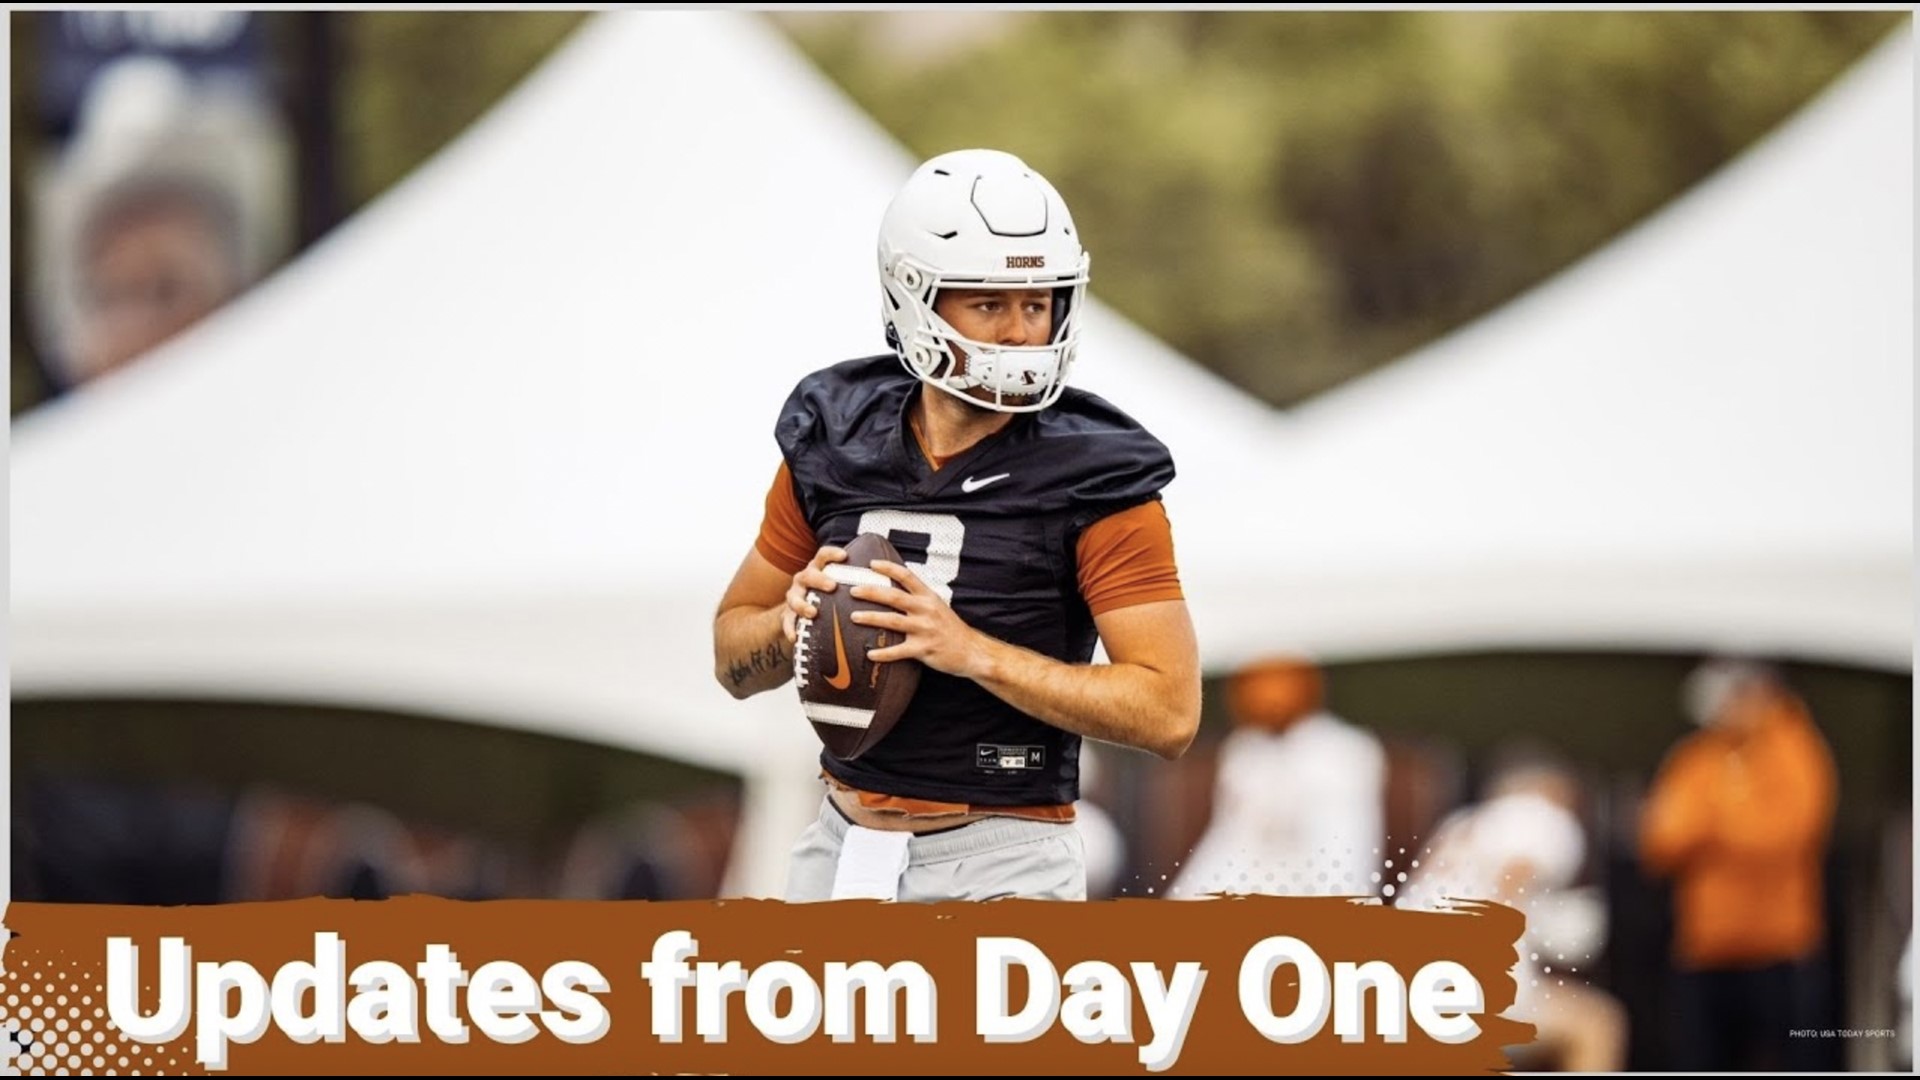 The Texas Longhorns Football team started spring practices yesterday and we received a wealth of updates from  @InsideTexasFootball  and @OnTexasFootball